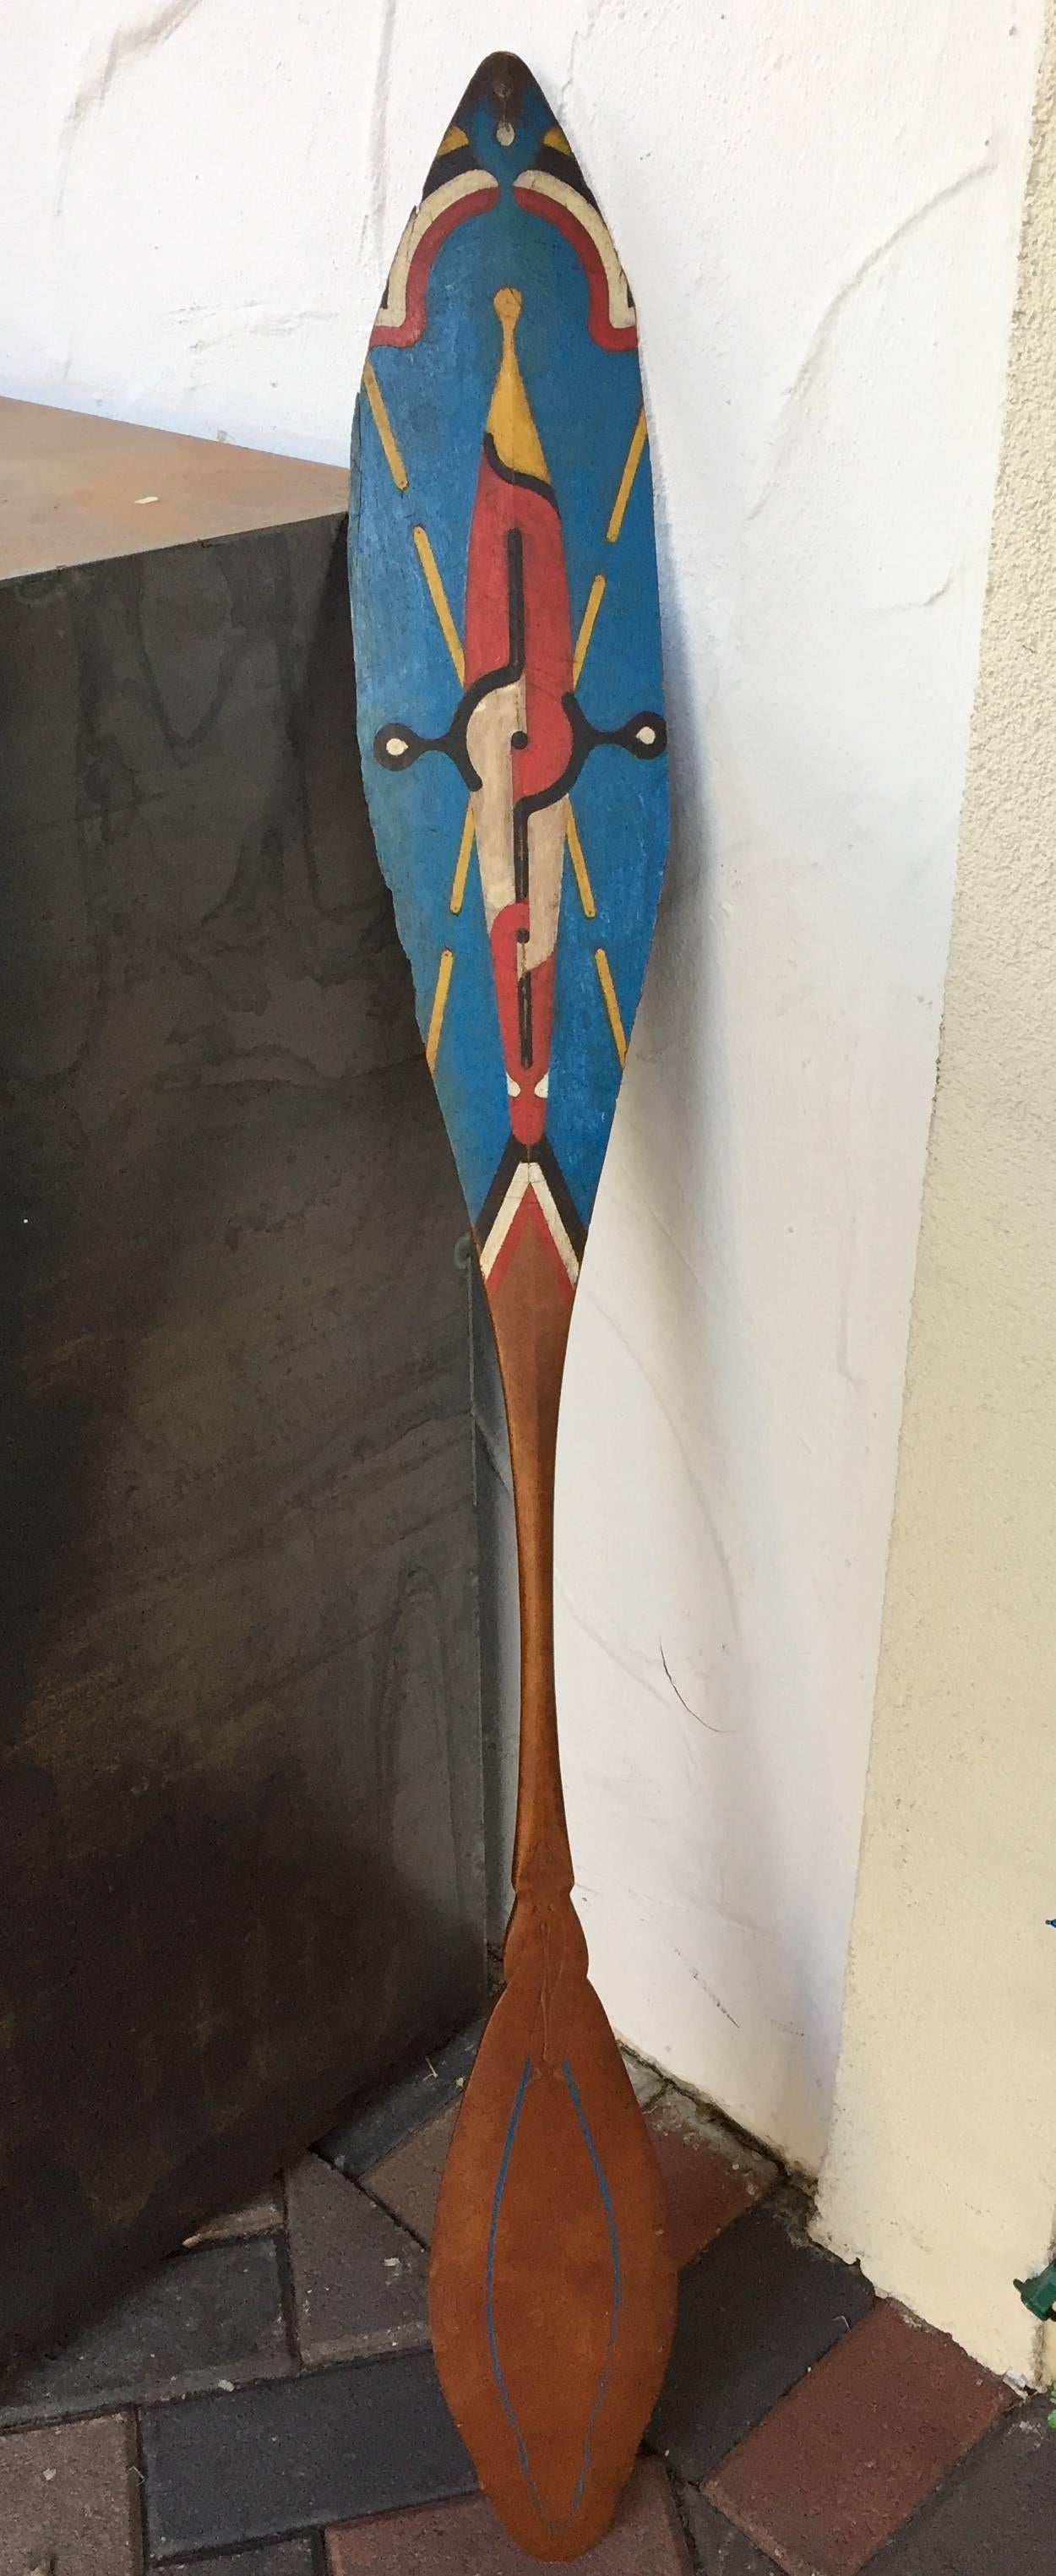 Finely painted with traditional geometric designs on both sides of one end, and subtle carved and incised flowing designs on both sides of the other end and adjoining shaft of the paddle. This example features an old used, worn patina and dates to